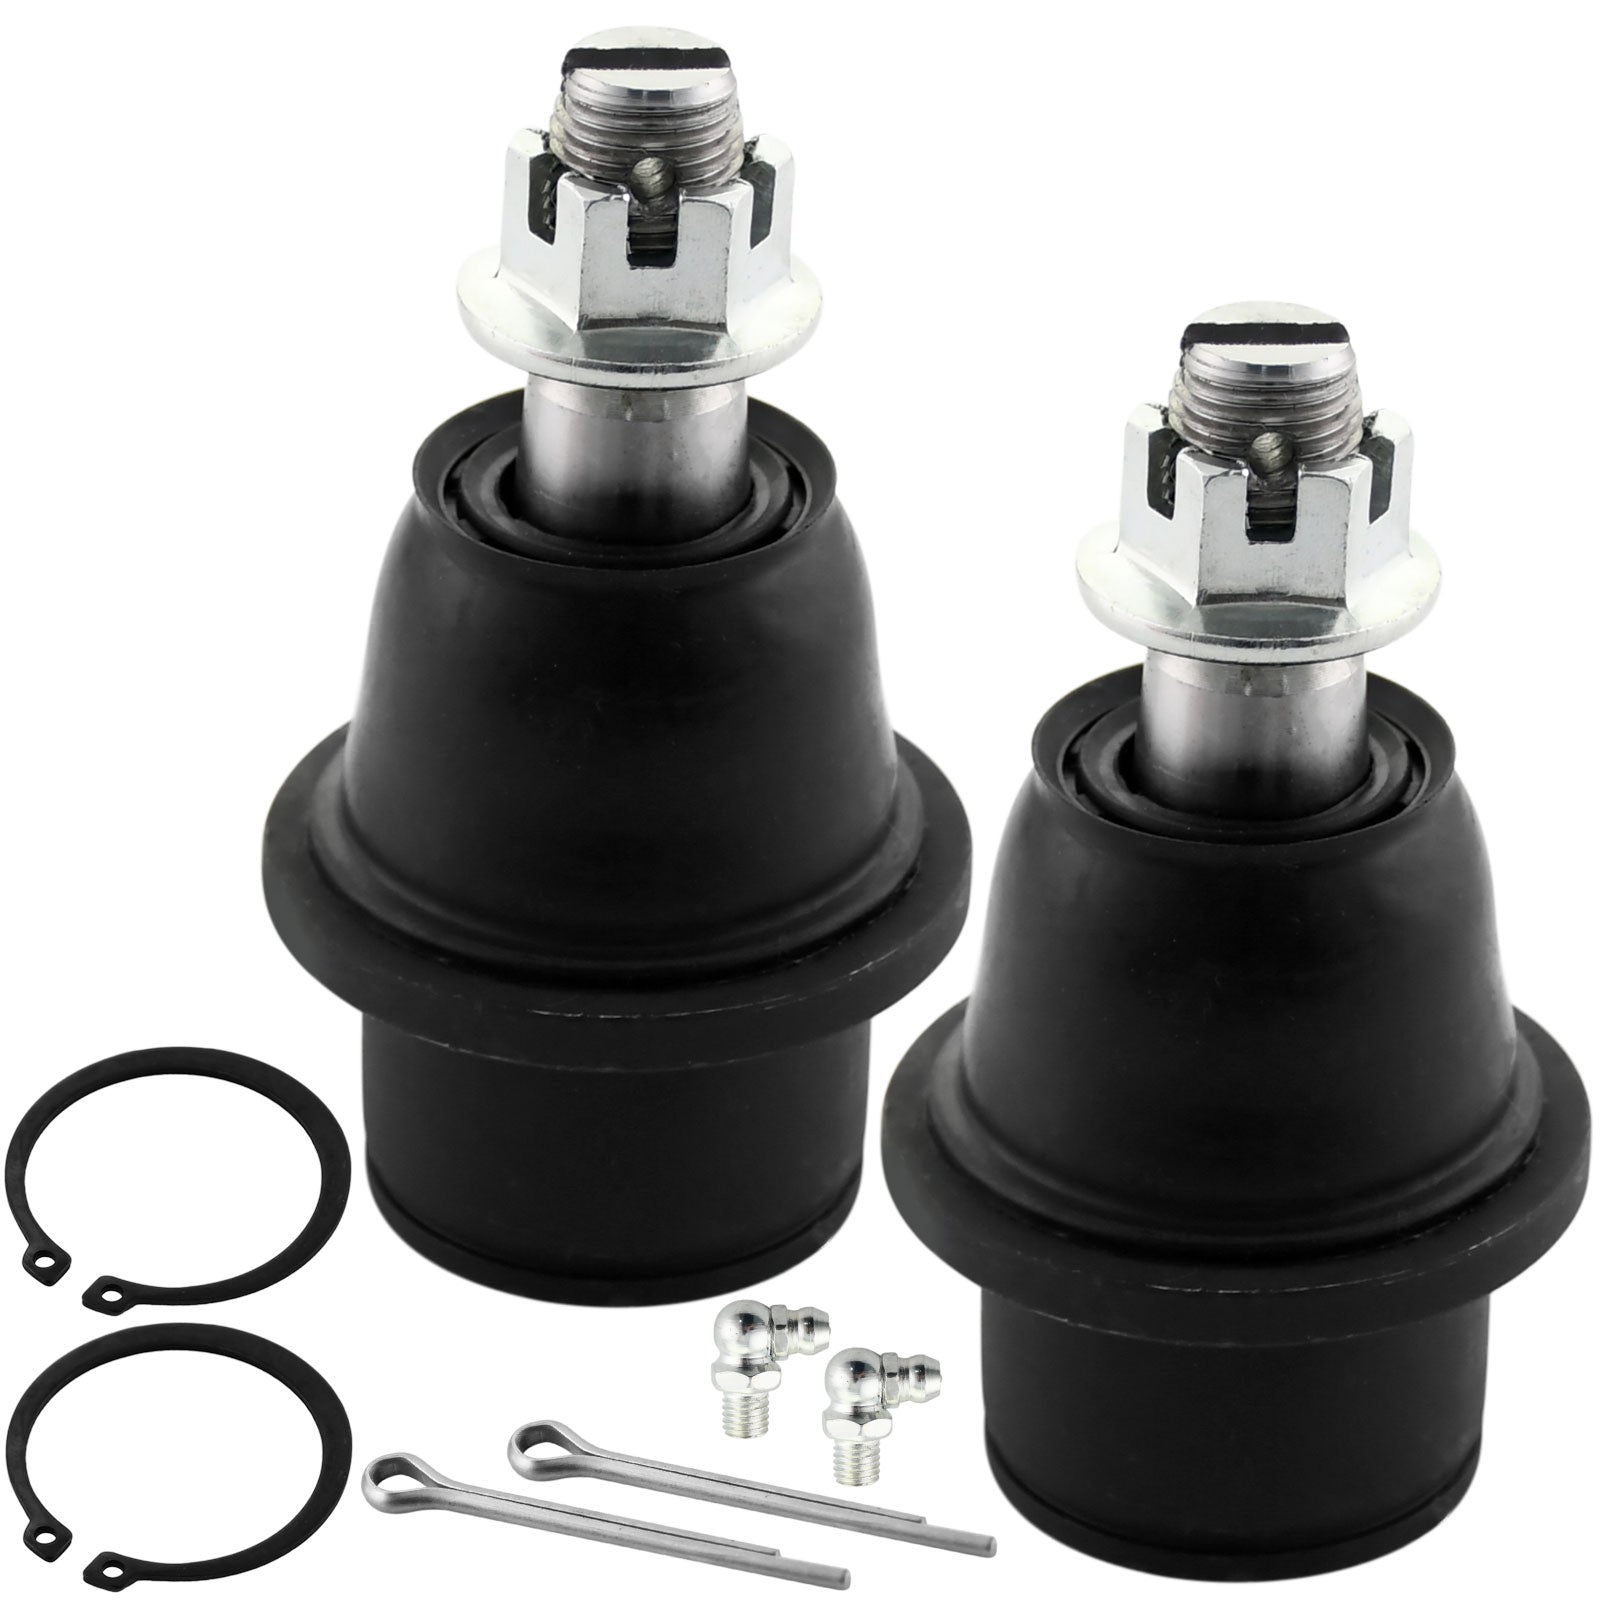 MotorbyMotor 2PC Front Lower Ball Joints Assembly Fits for Ford F-150 2005-2008, Lincoln Mark LT 2006-2008 Suspension Tie Rod Ball Joint-All Models MotorbyMotor